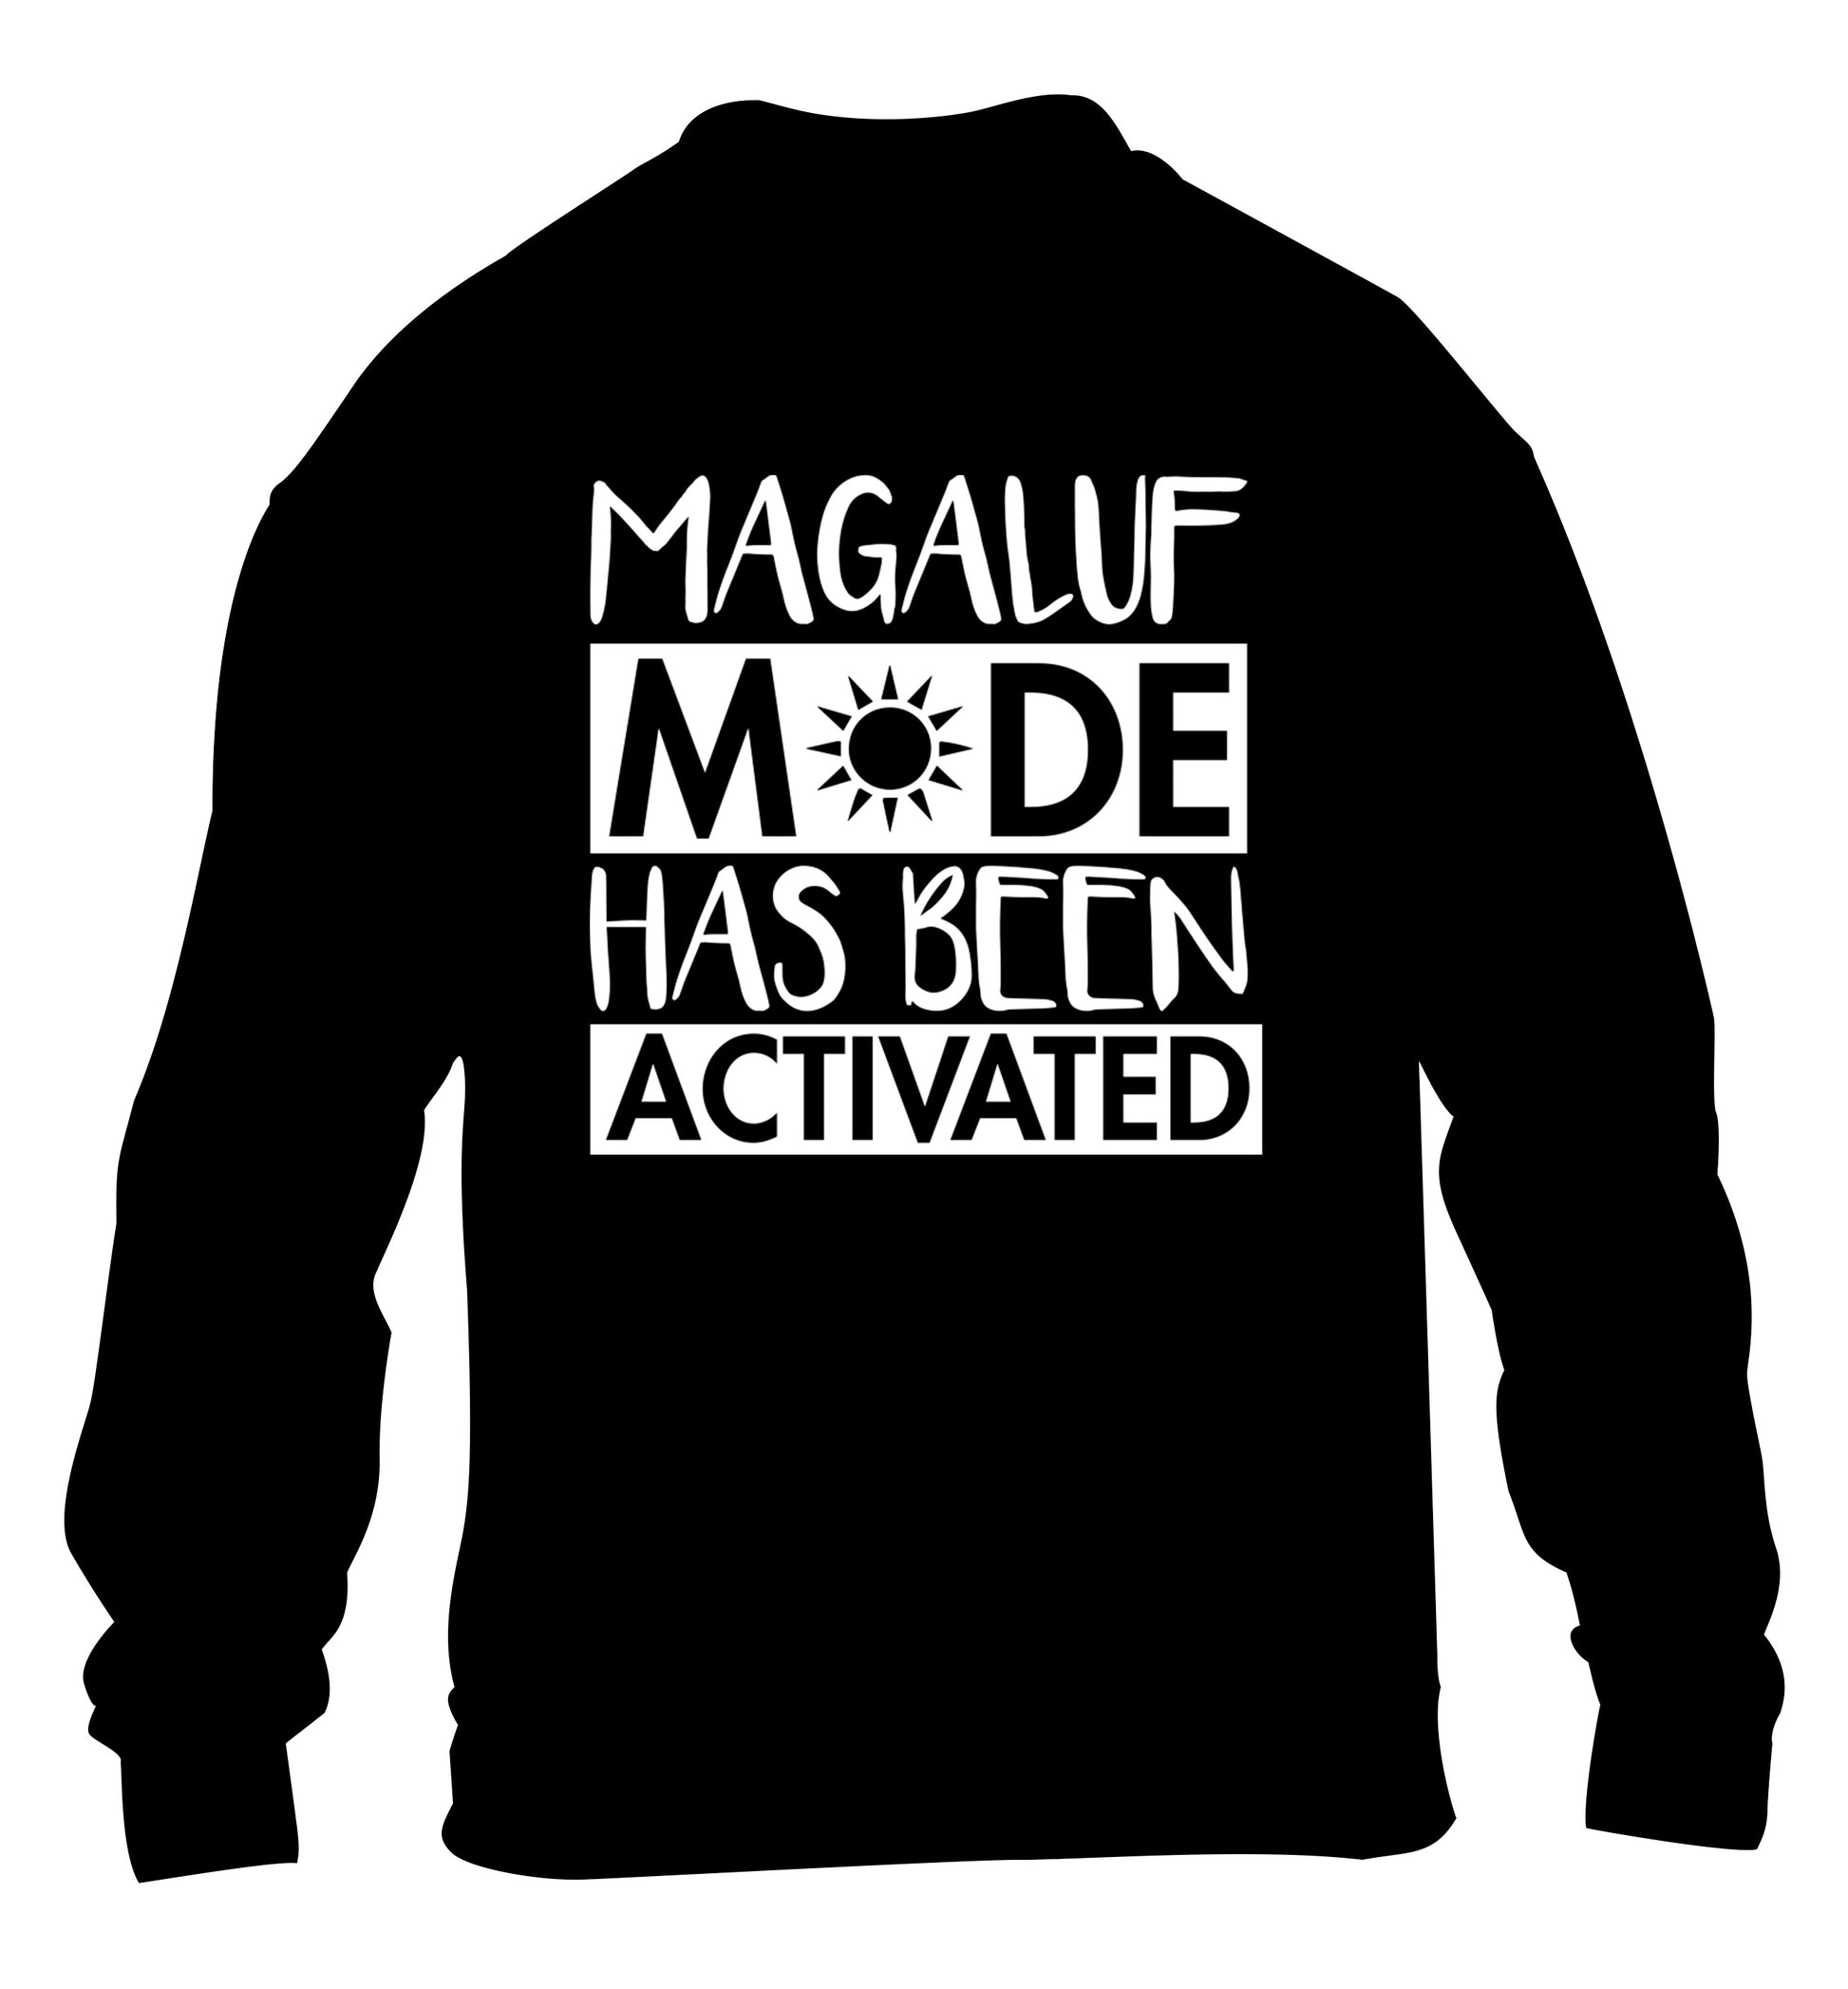 Magaluf mode has been activated children's black sweater 12-13 Years